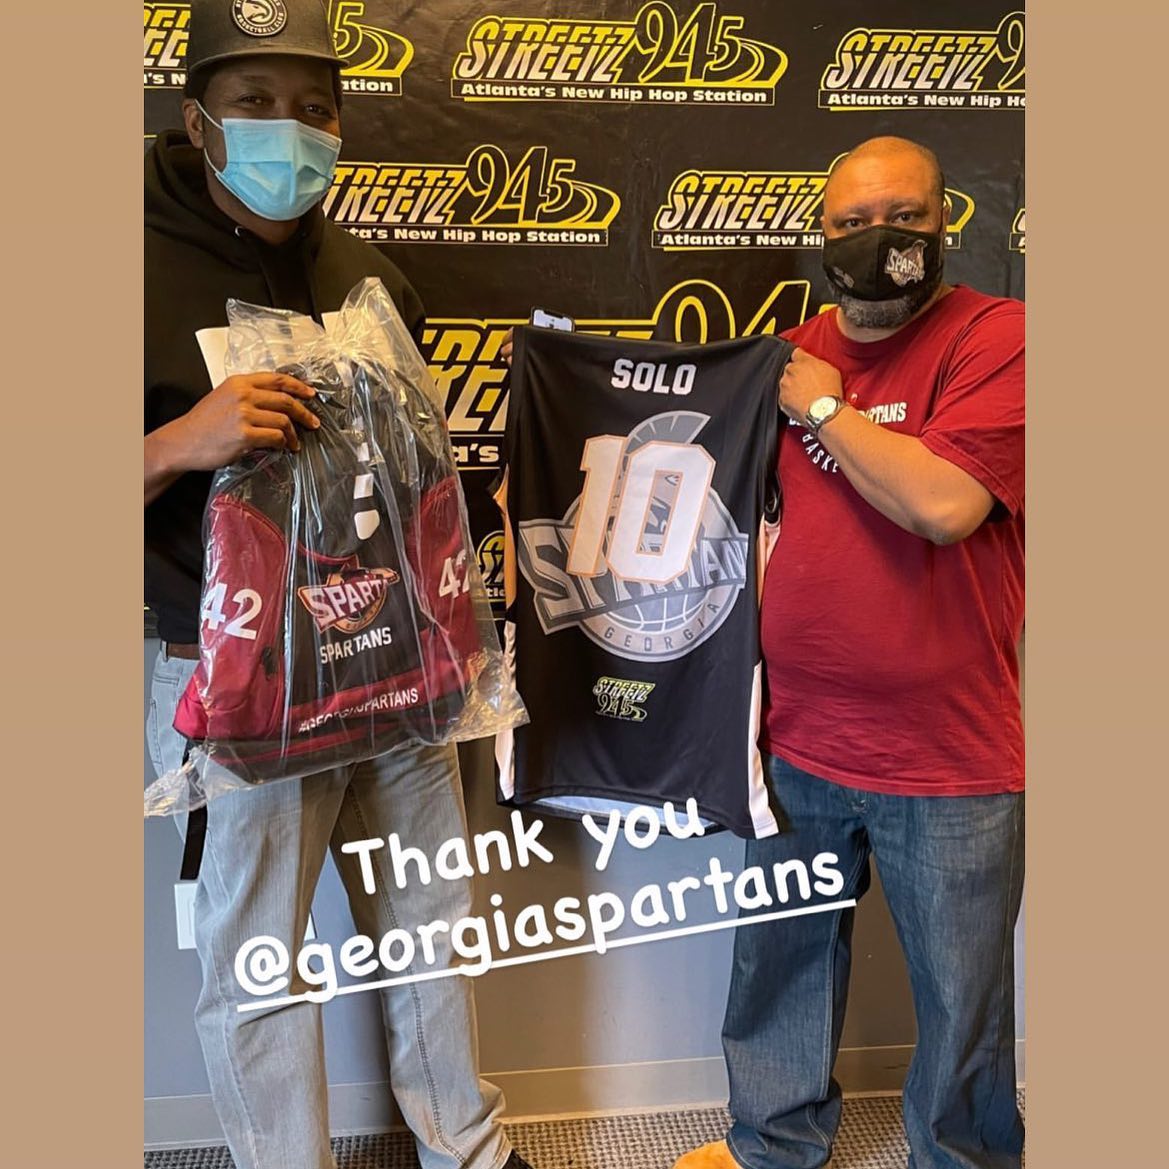 We Presented @usofsolo of @streetz945atl his personal jersey today. Thanks again #streetz945atl for being a sponsors!! Check out o